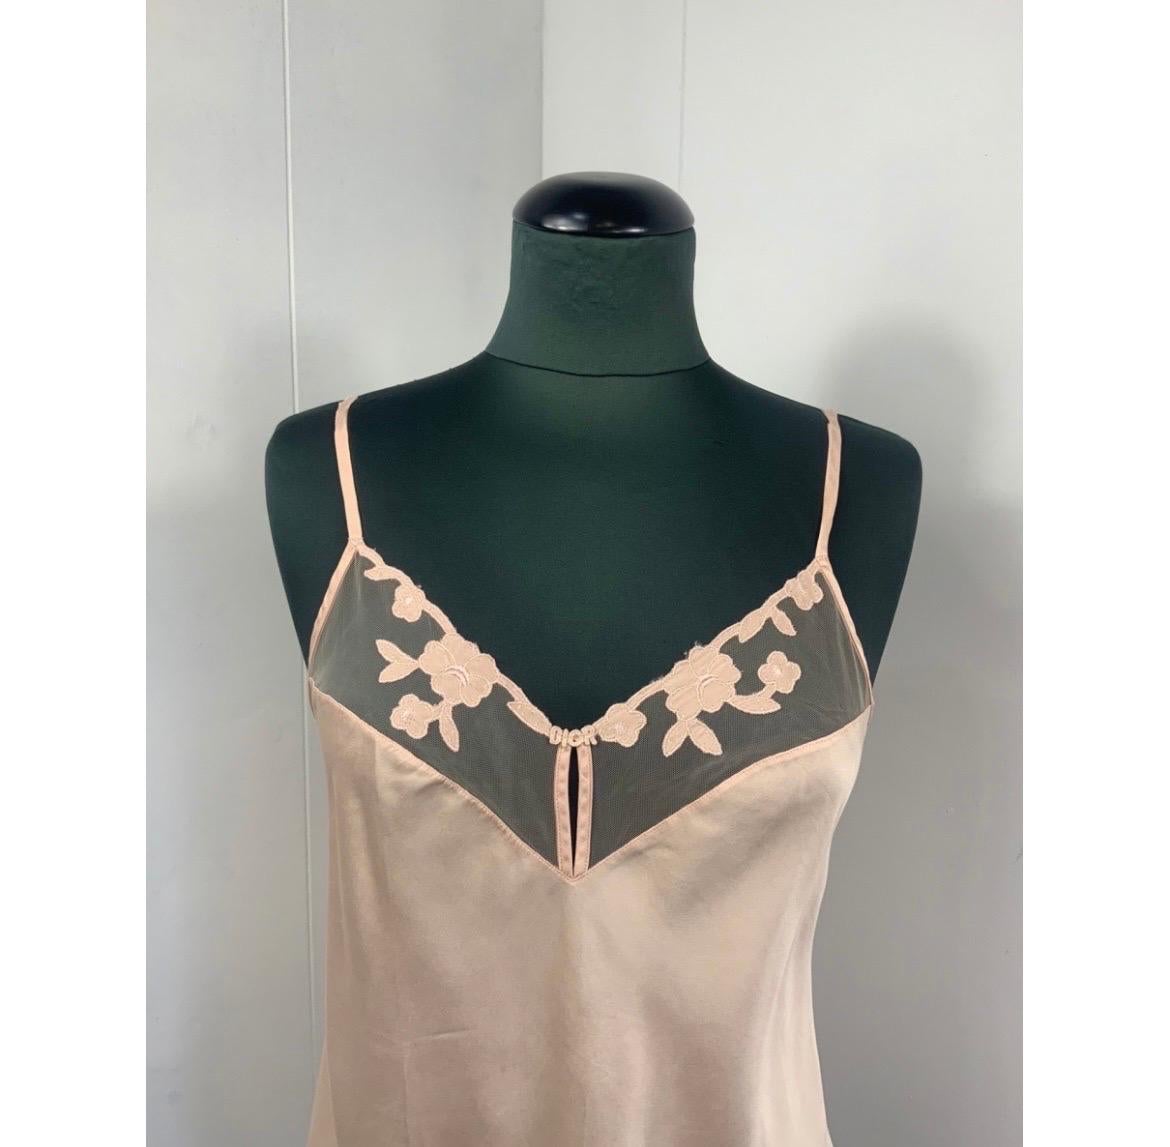 Christian Dior Lingerie. 
In pink silk. Vintage garment.
Size not indicated but wears an international S/M.
Bust 44 cm
Length 65 cm
It has an internal speck that shines slightly even on the outside.
Good general condition